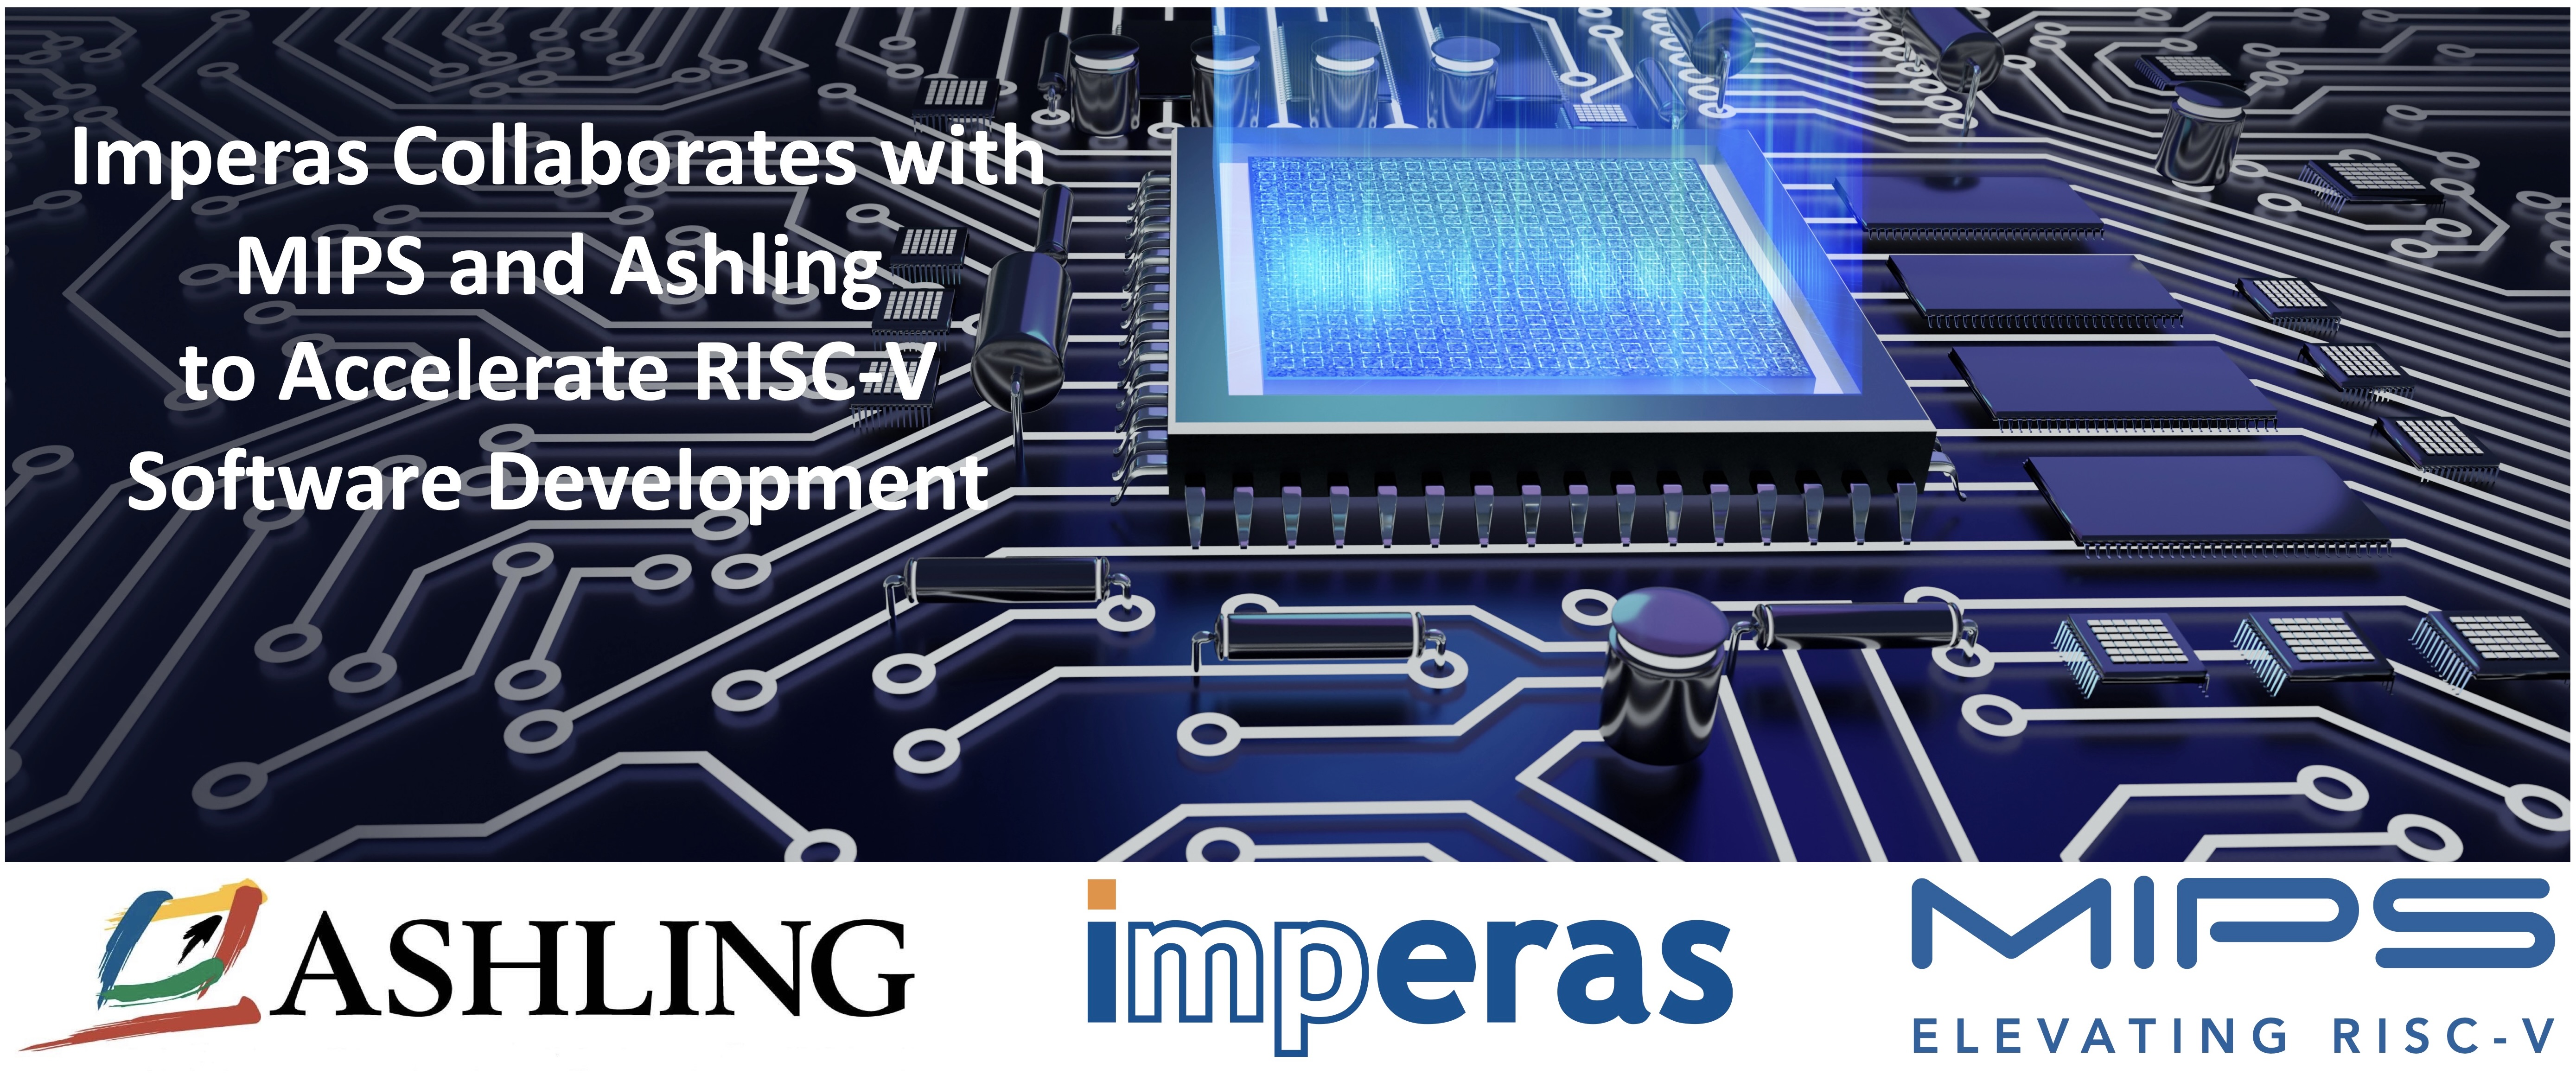 Imperas Collaborates with MIPS and Ashling to Accelerate RISC-V Software Development